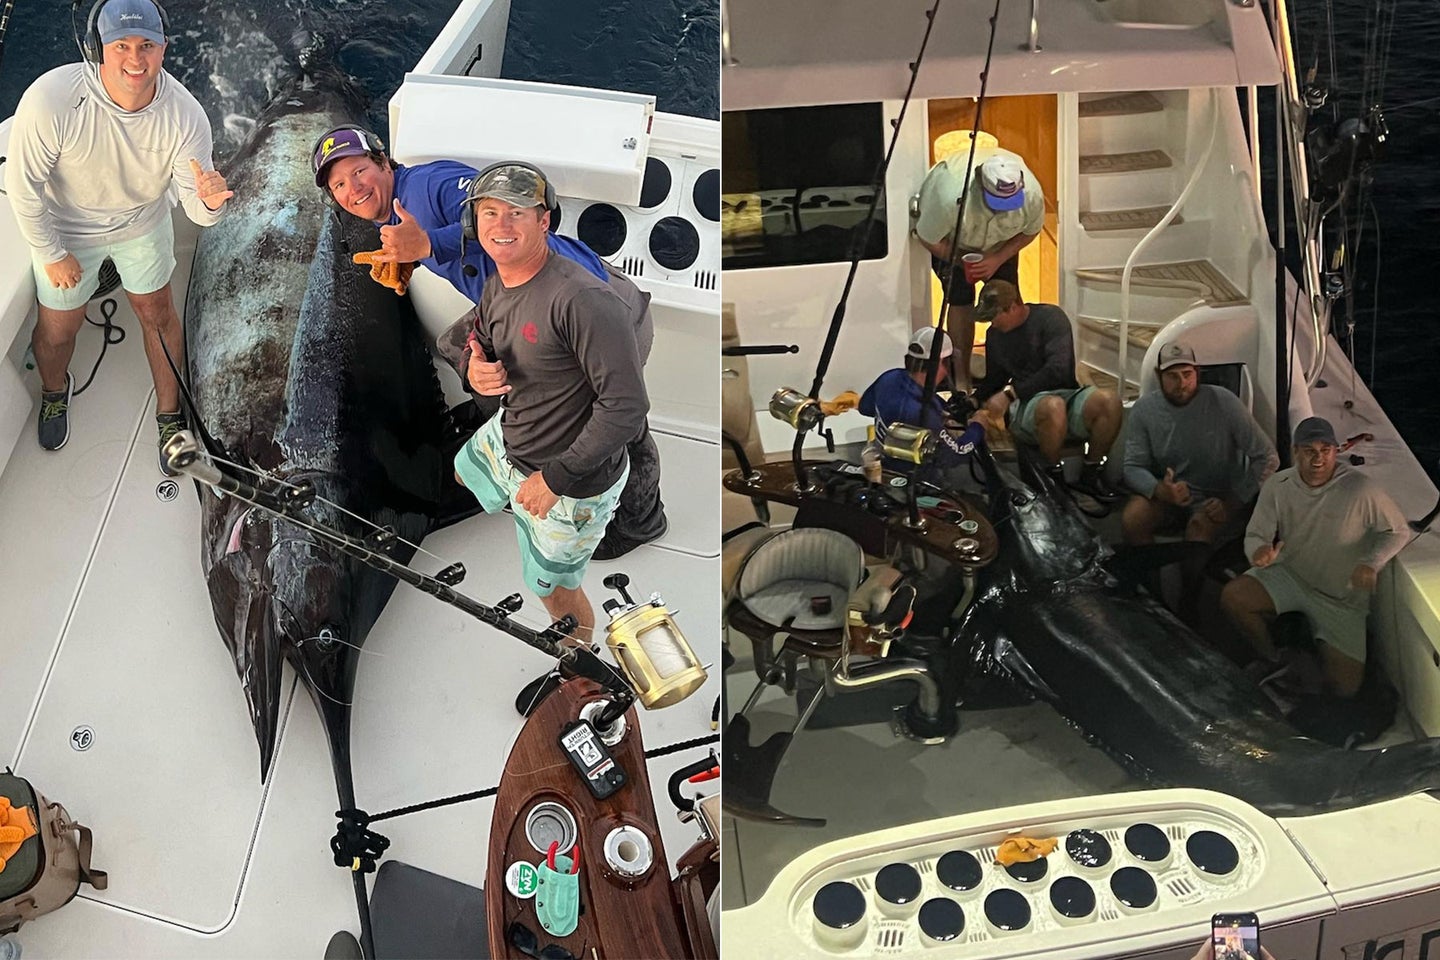 Angler Boats Massive Marlin Weighing More Than 1,000 Pounds